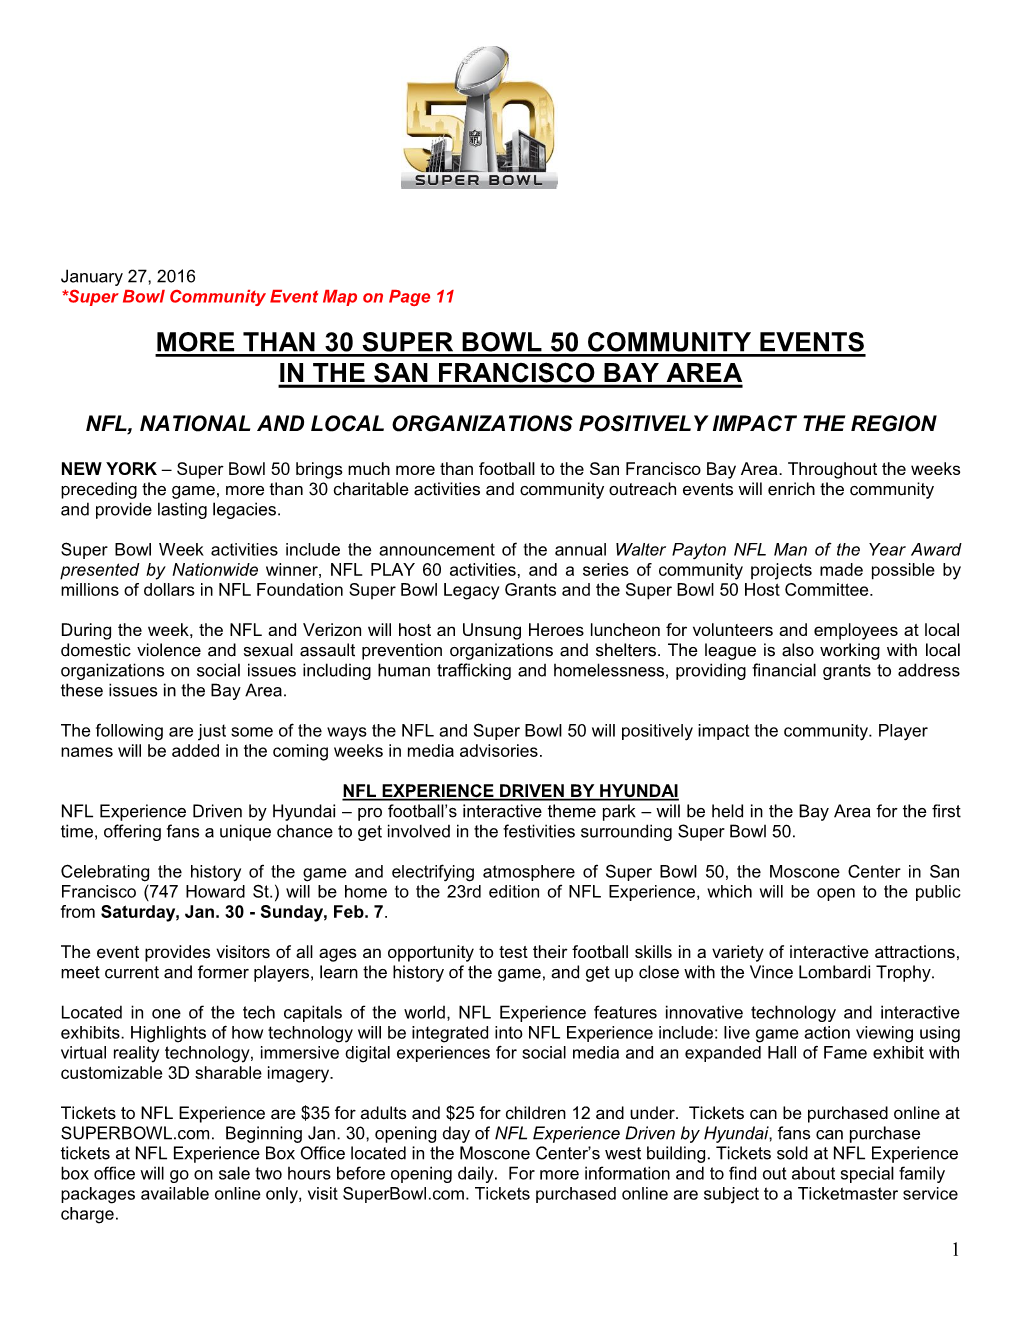 More Than 30 Super Bowl 50 Community Events in the San Francisco Bay Area